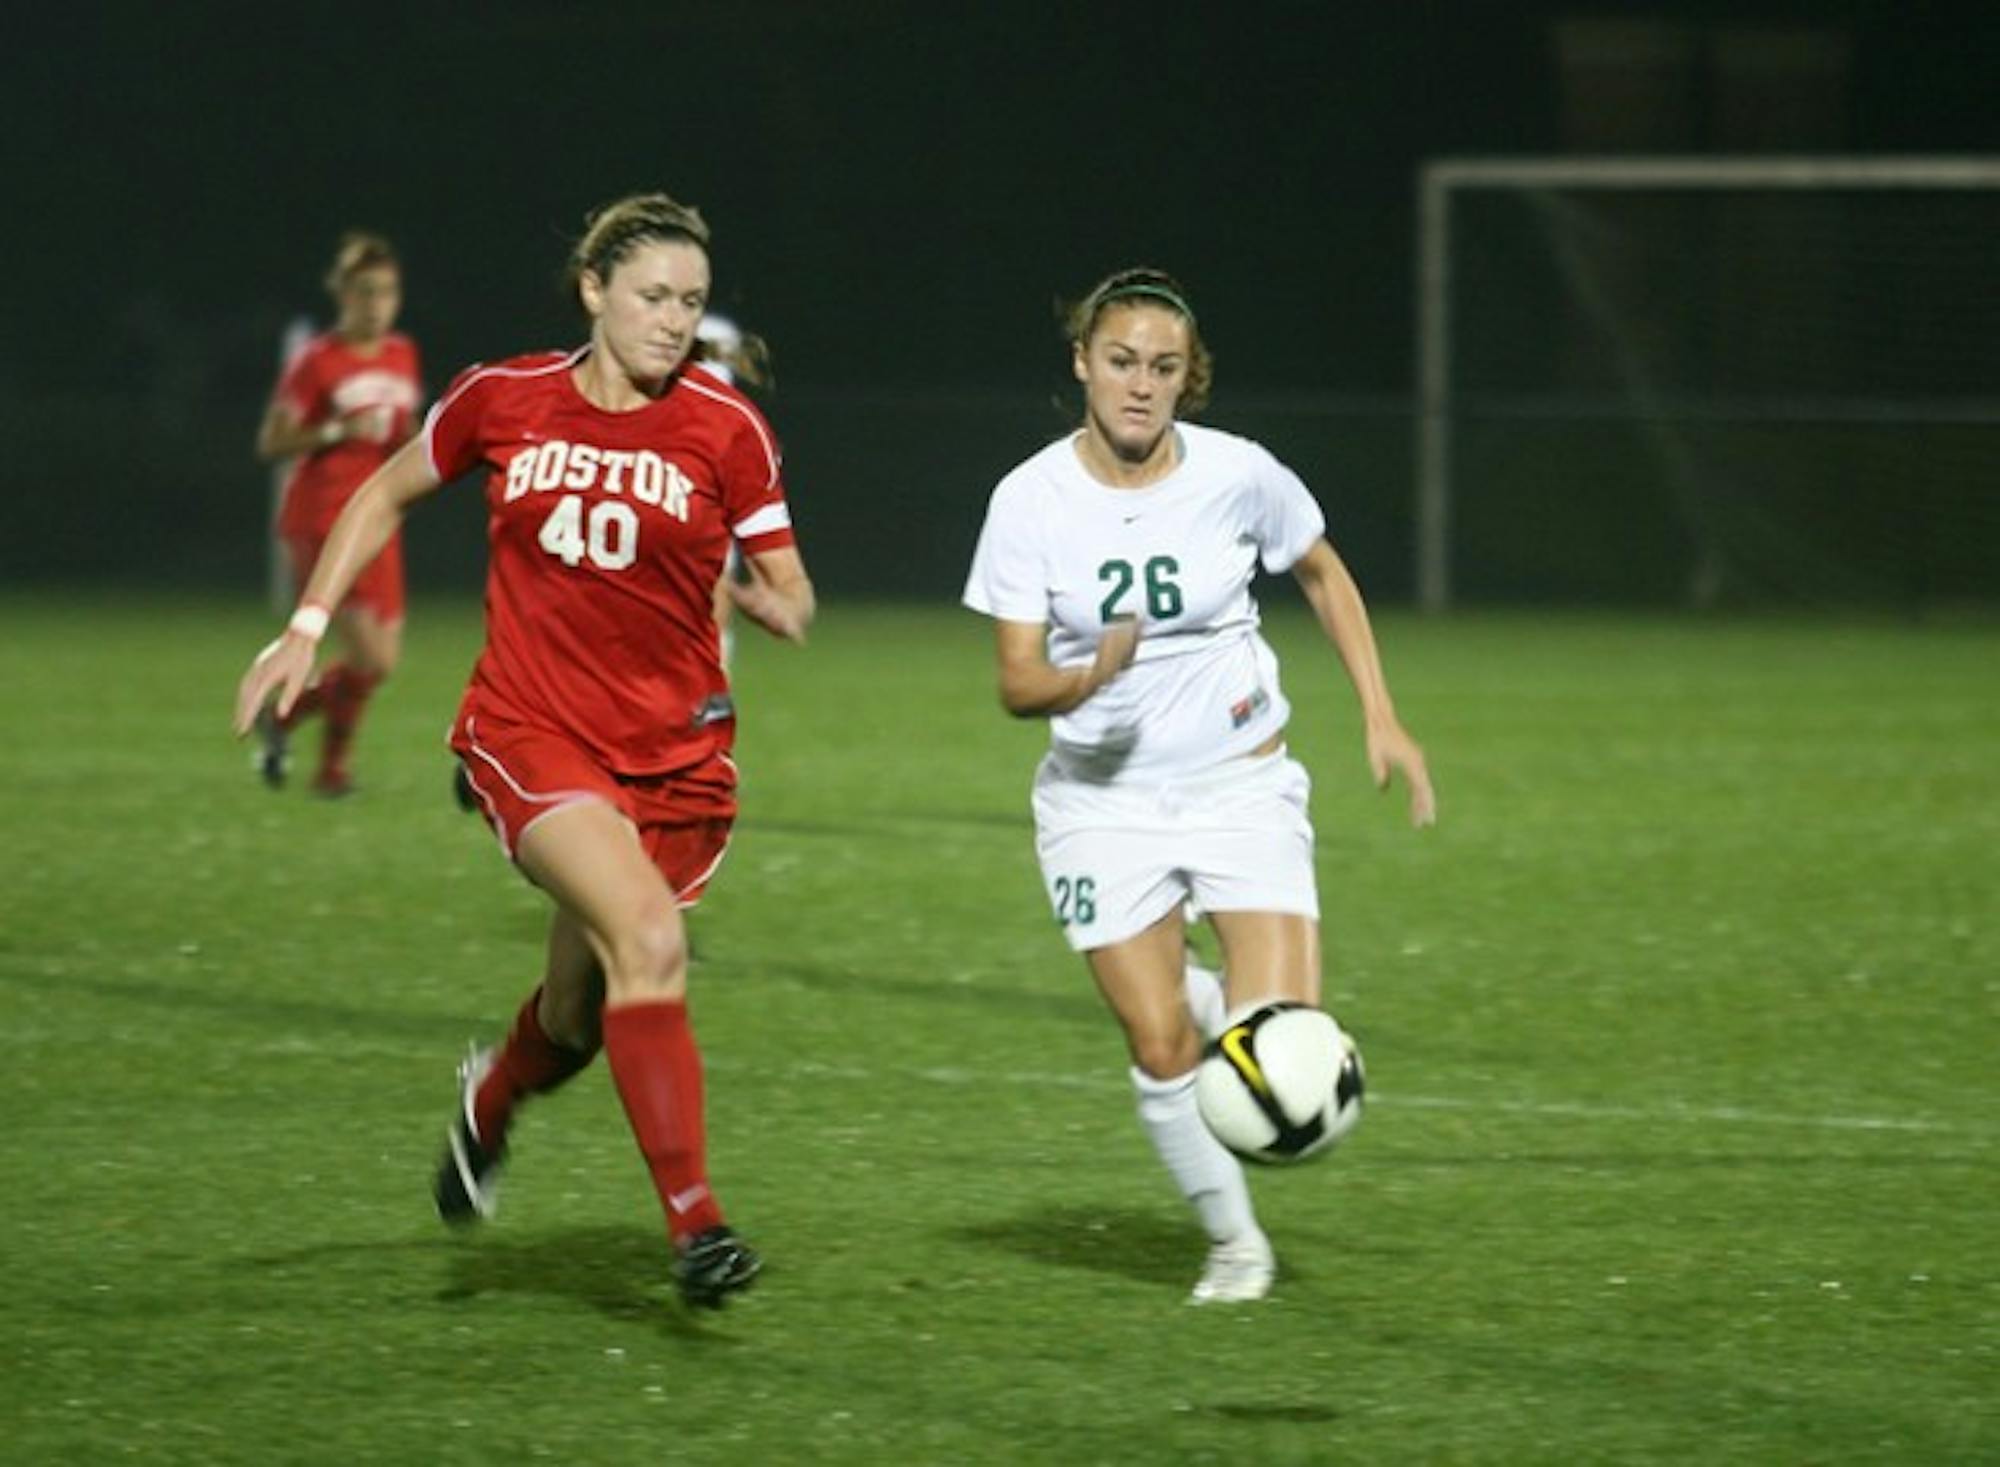 Aly O'Dea '12 chases a loose ball against Boston University, Wedsnesday